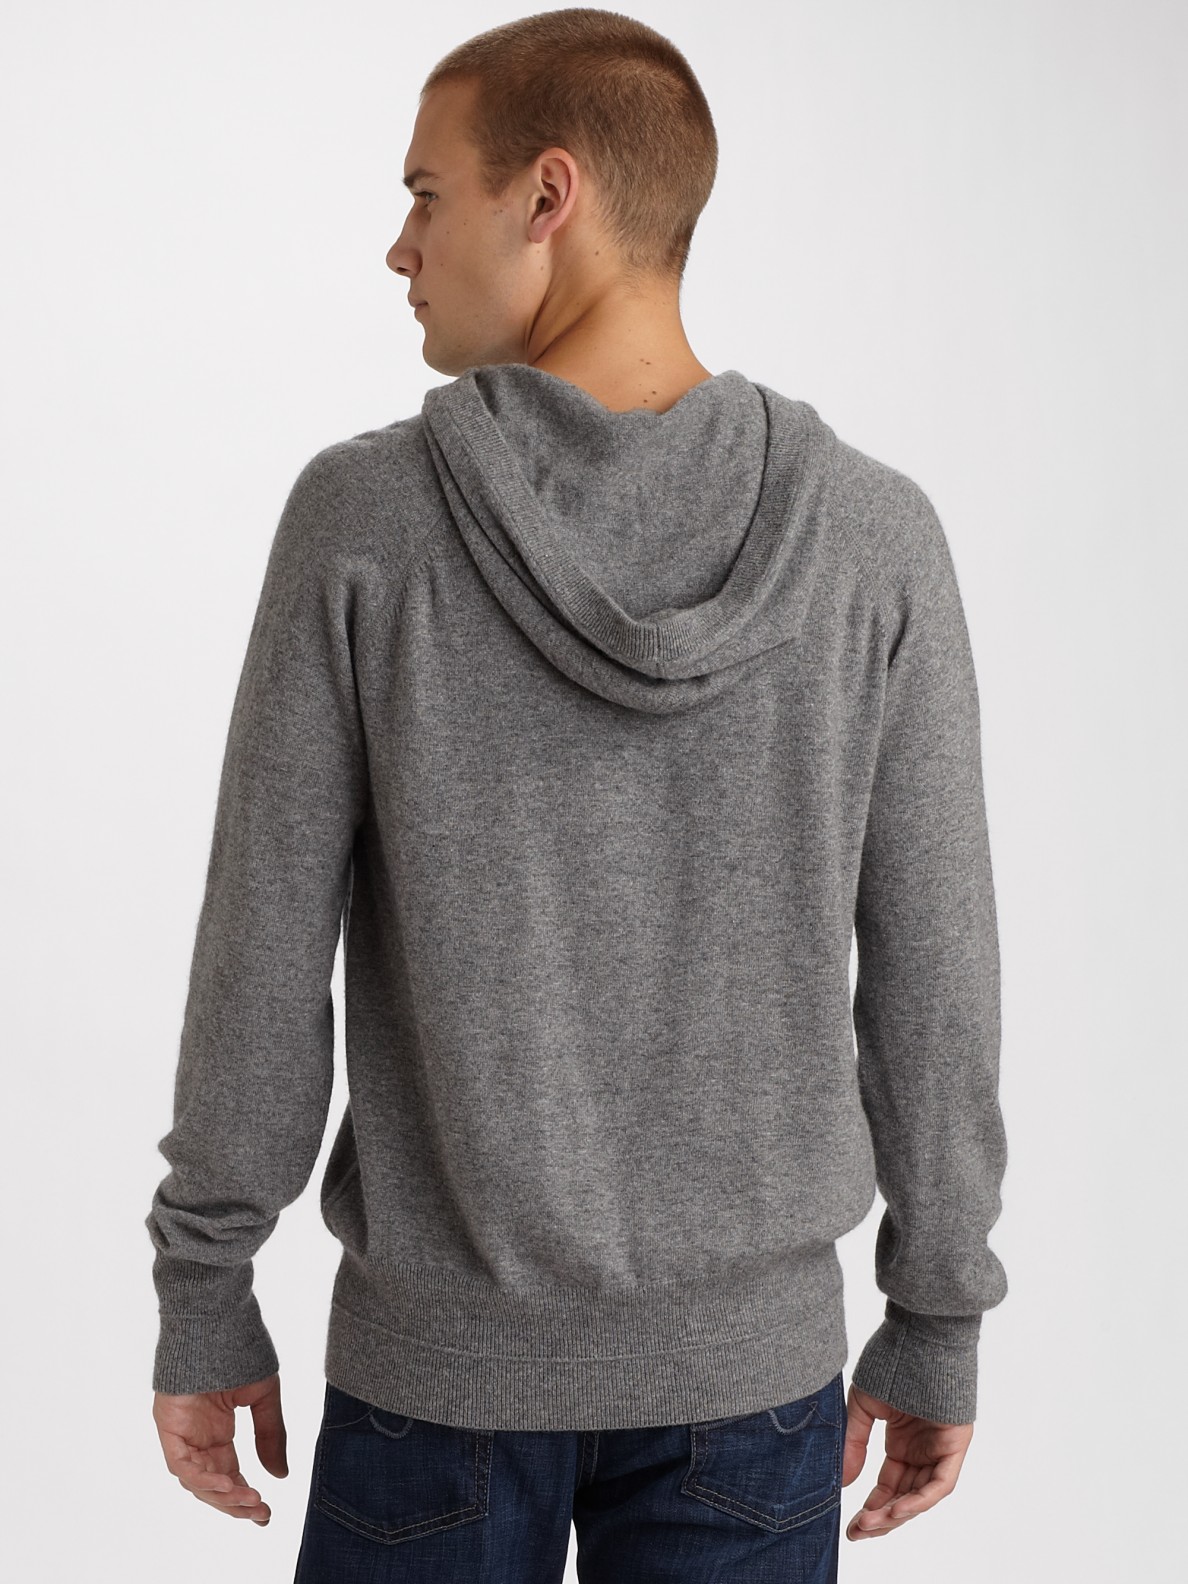 Lyst - T By Alexander Wang Pullover Hoodie in Gray for Men